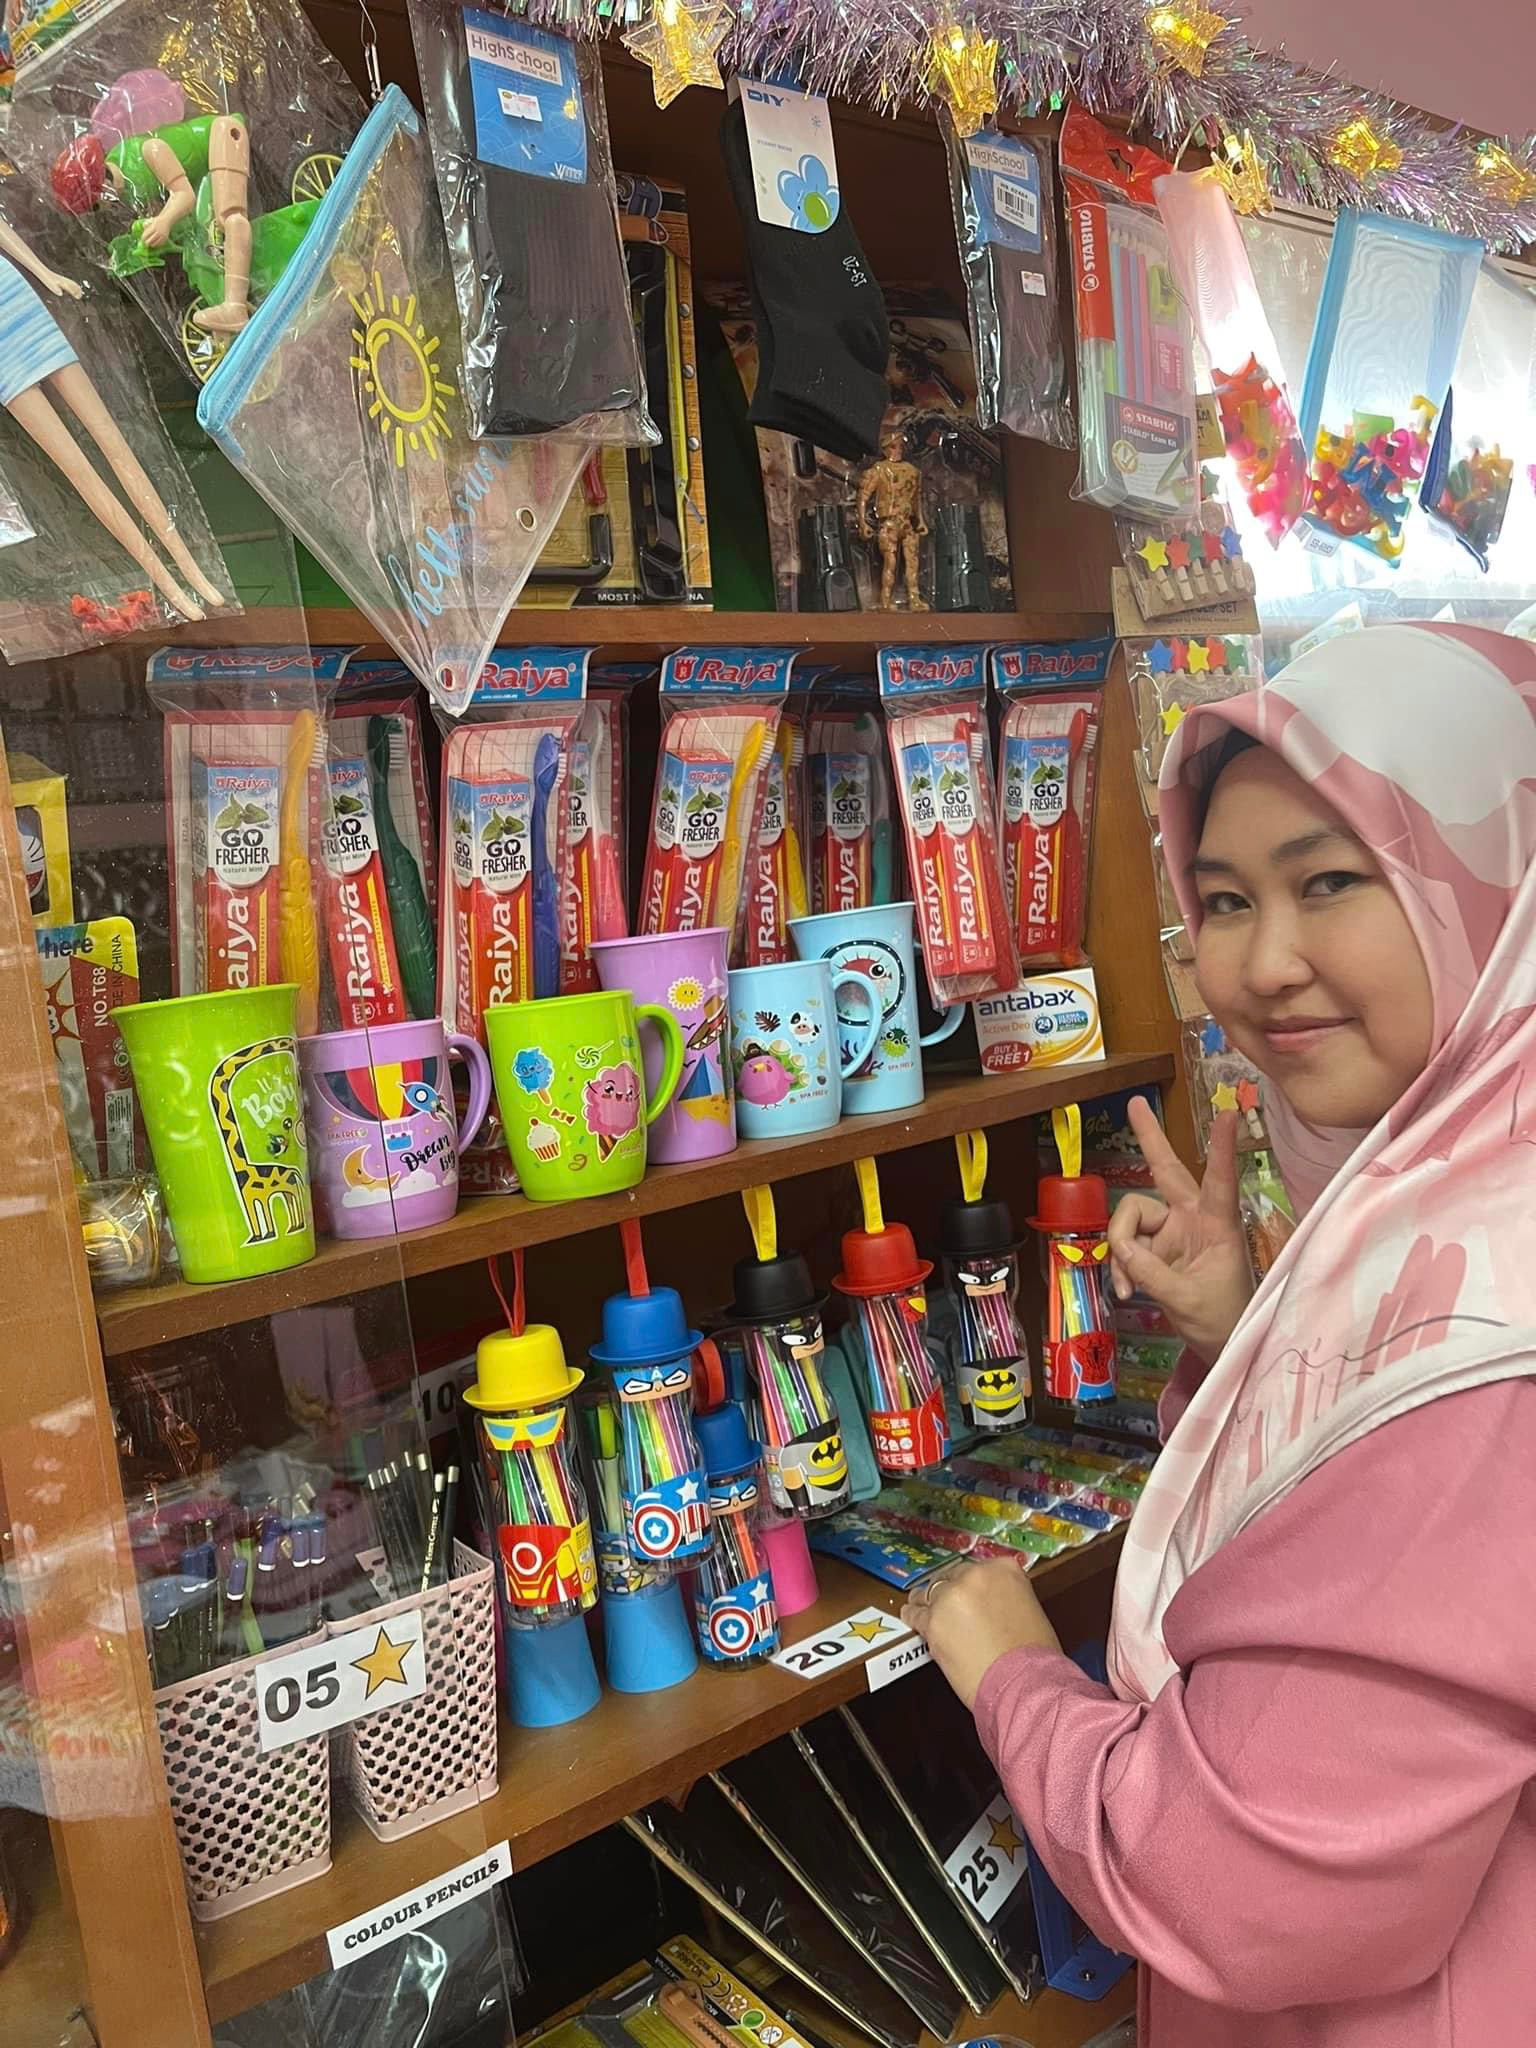 Sarawakian teacher sets up mini 'kedai runcit' to allow students to redeem gifts, funded it with her own money | weirdkaya